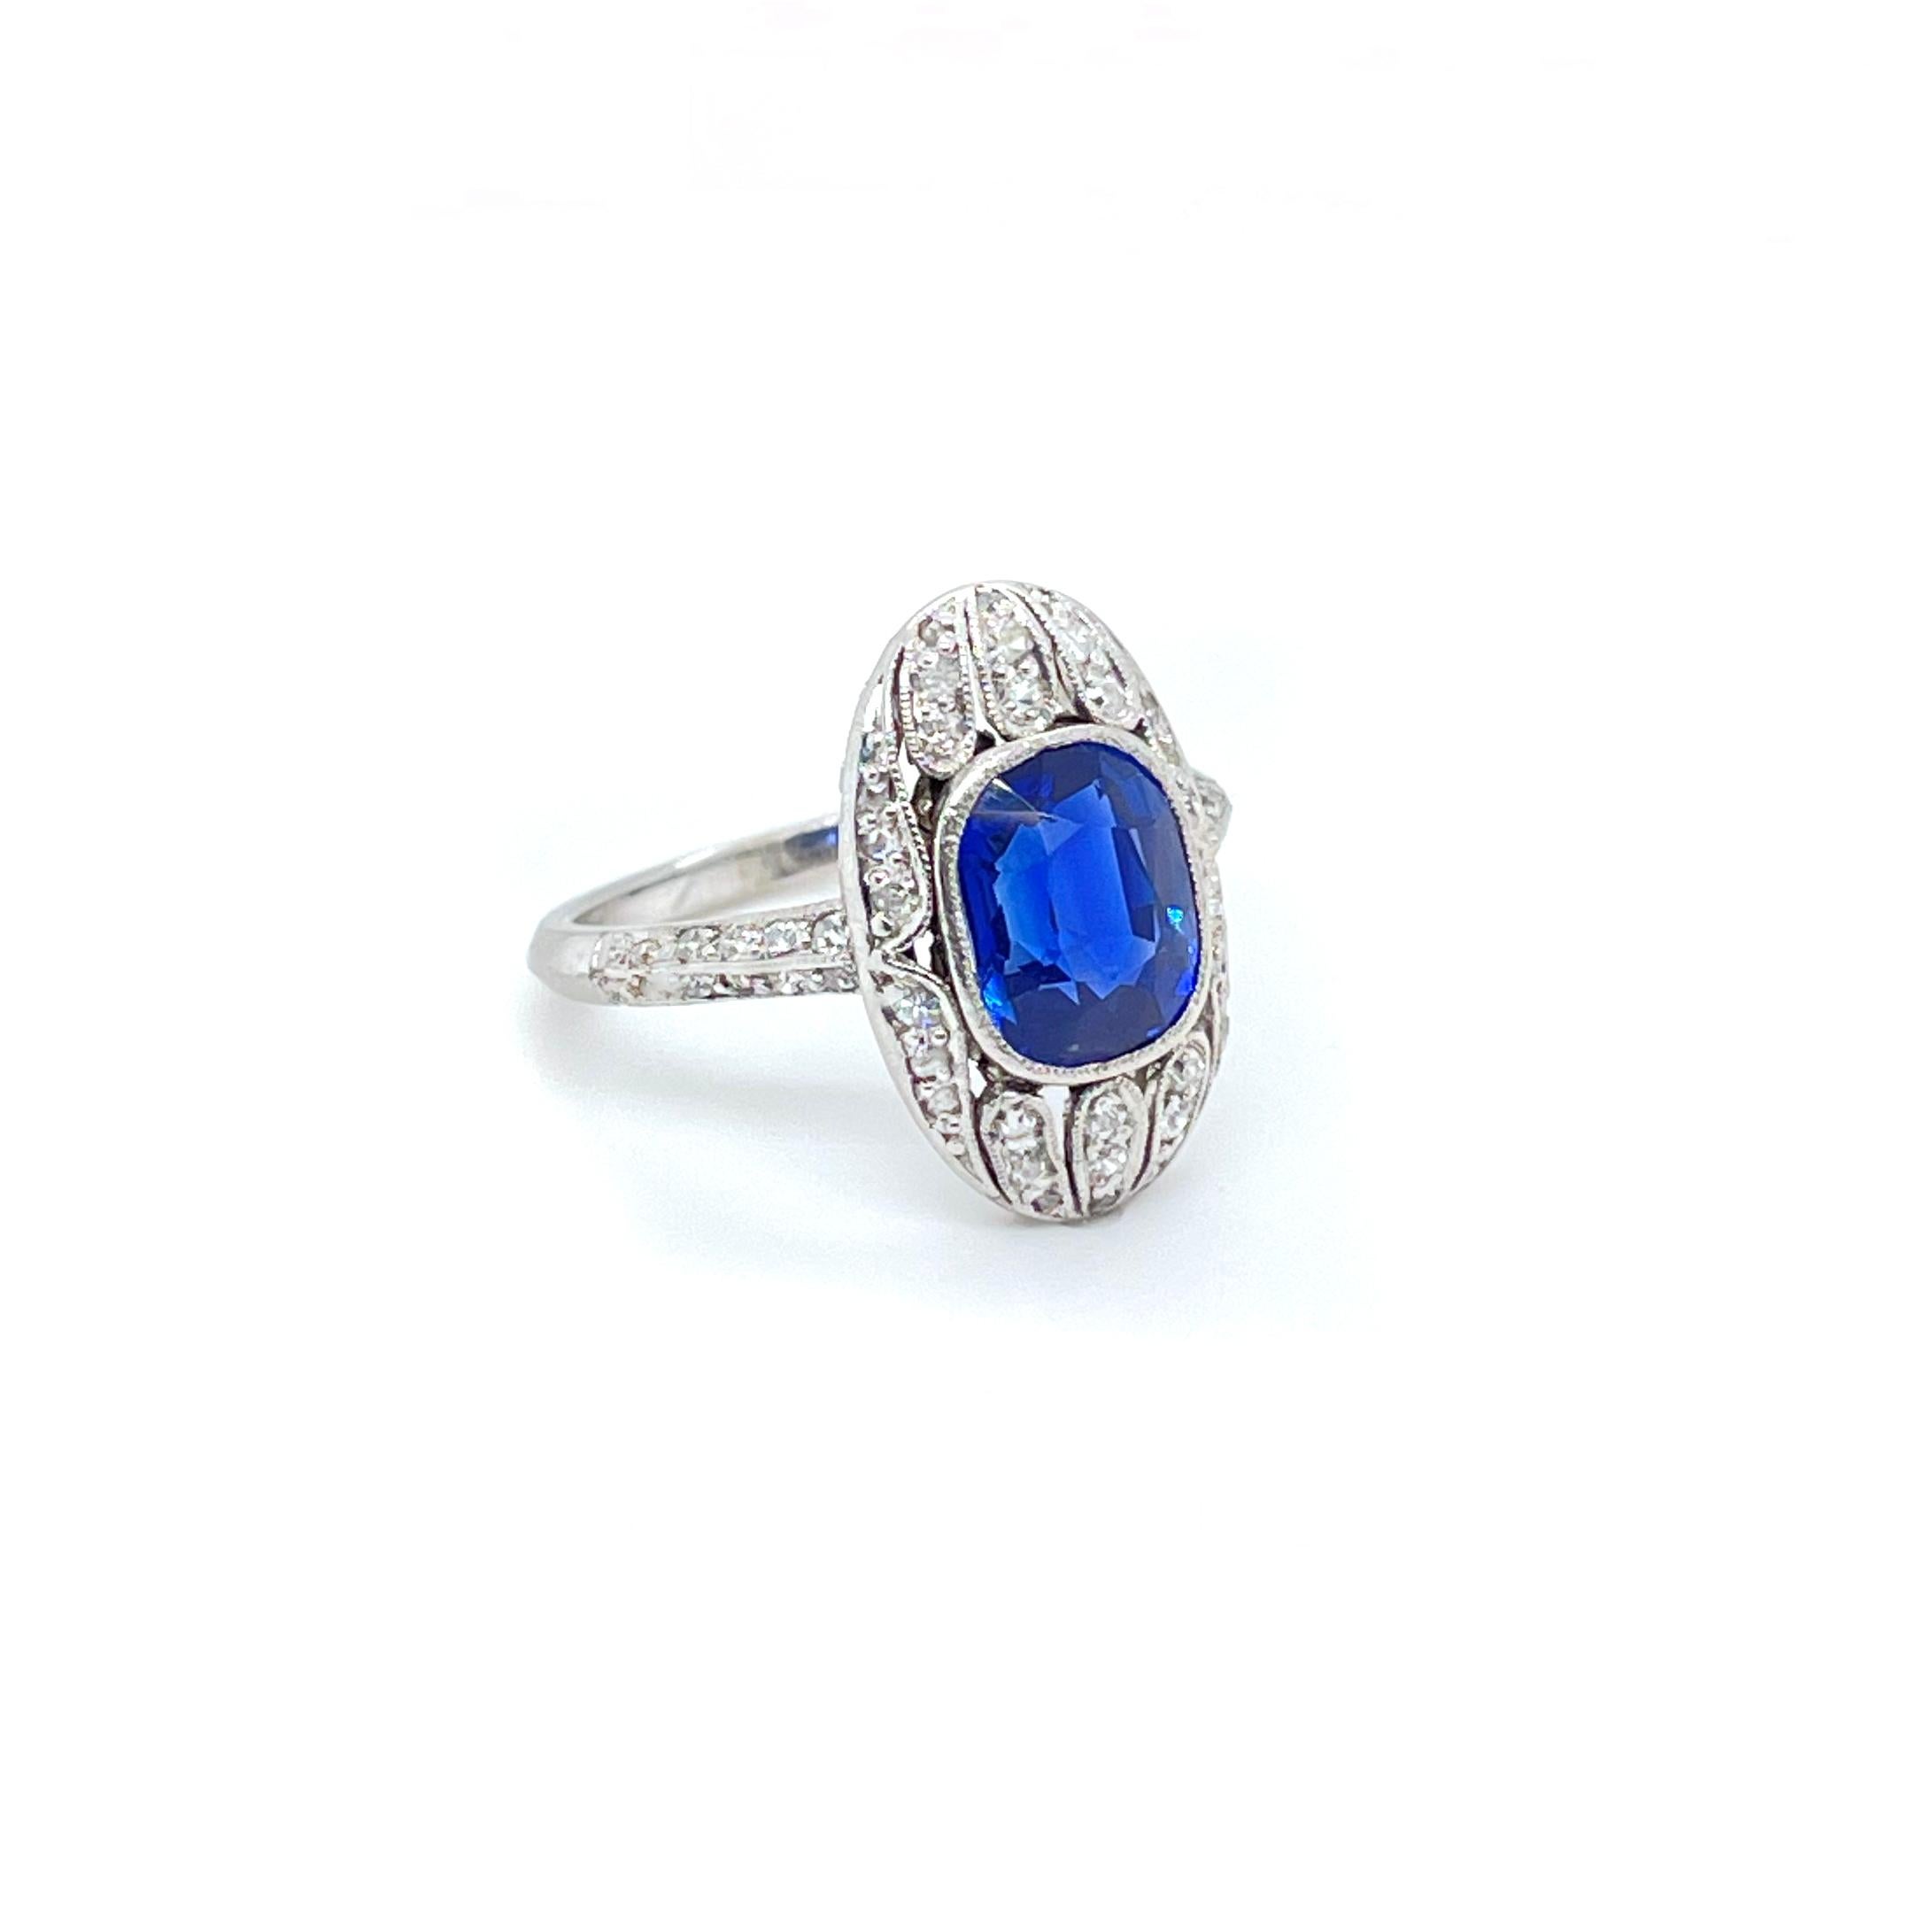 Edwardian Kashmir Sapphire and Diamond Ring, ca. 1910s

A very complete Kashmir sapphire and diamond ring from the 1910s. The central Kashmir sapphire weighs 2.56 carats (certified SSEF) and is of a beautiful intense velvety blue colour with a very